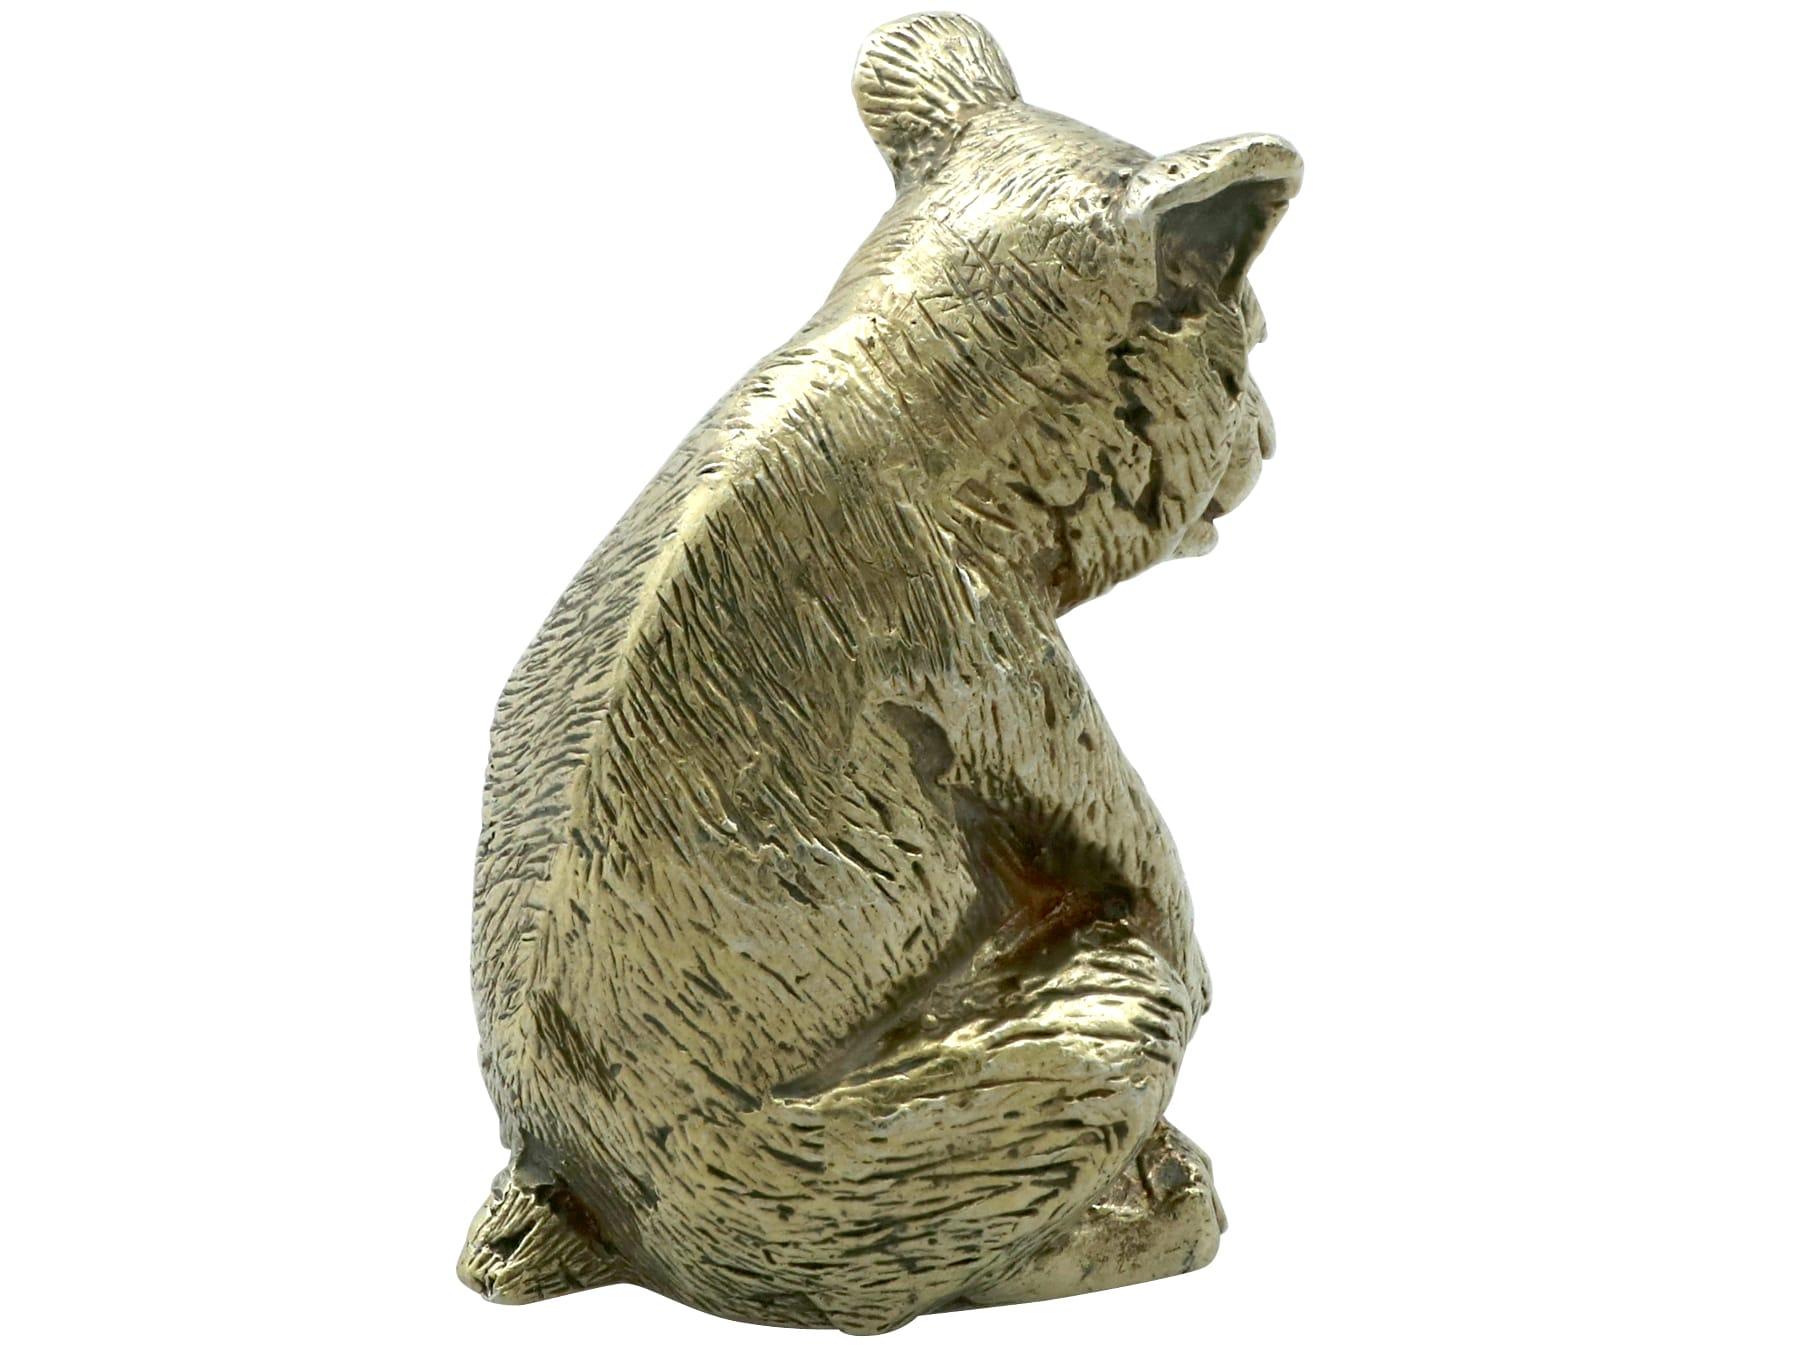 Vintage Sterling Silver Gilt Bear Ornament by Stuart Devlin In Excellent Condition For Sale In Jesmond, Newcastle Upon Tyne